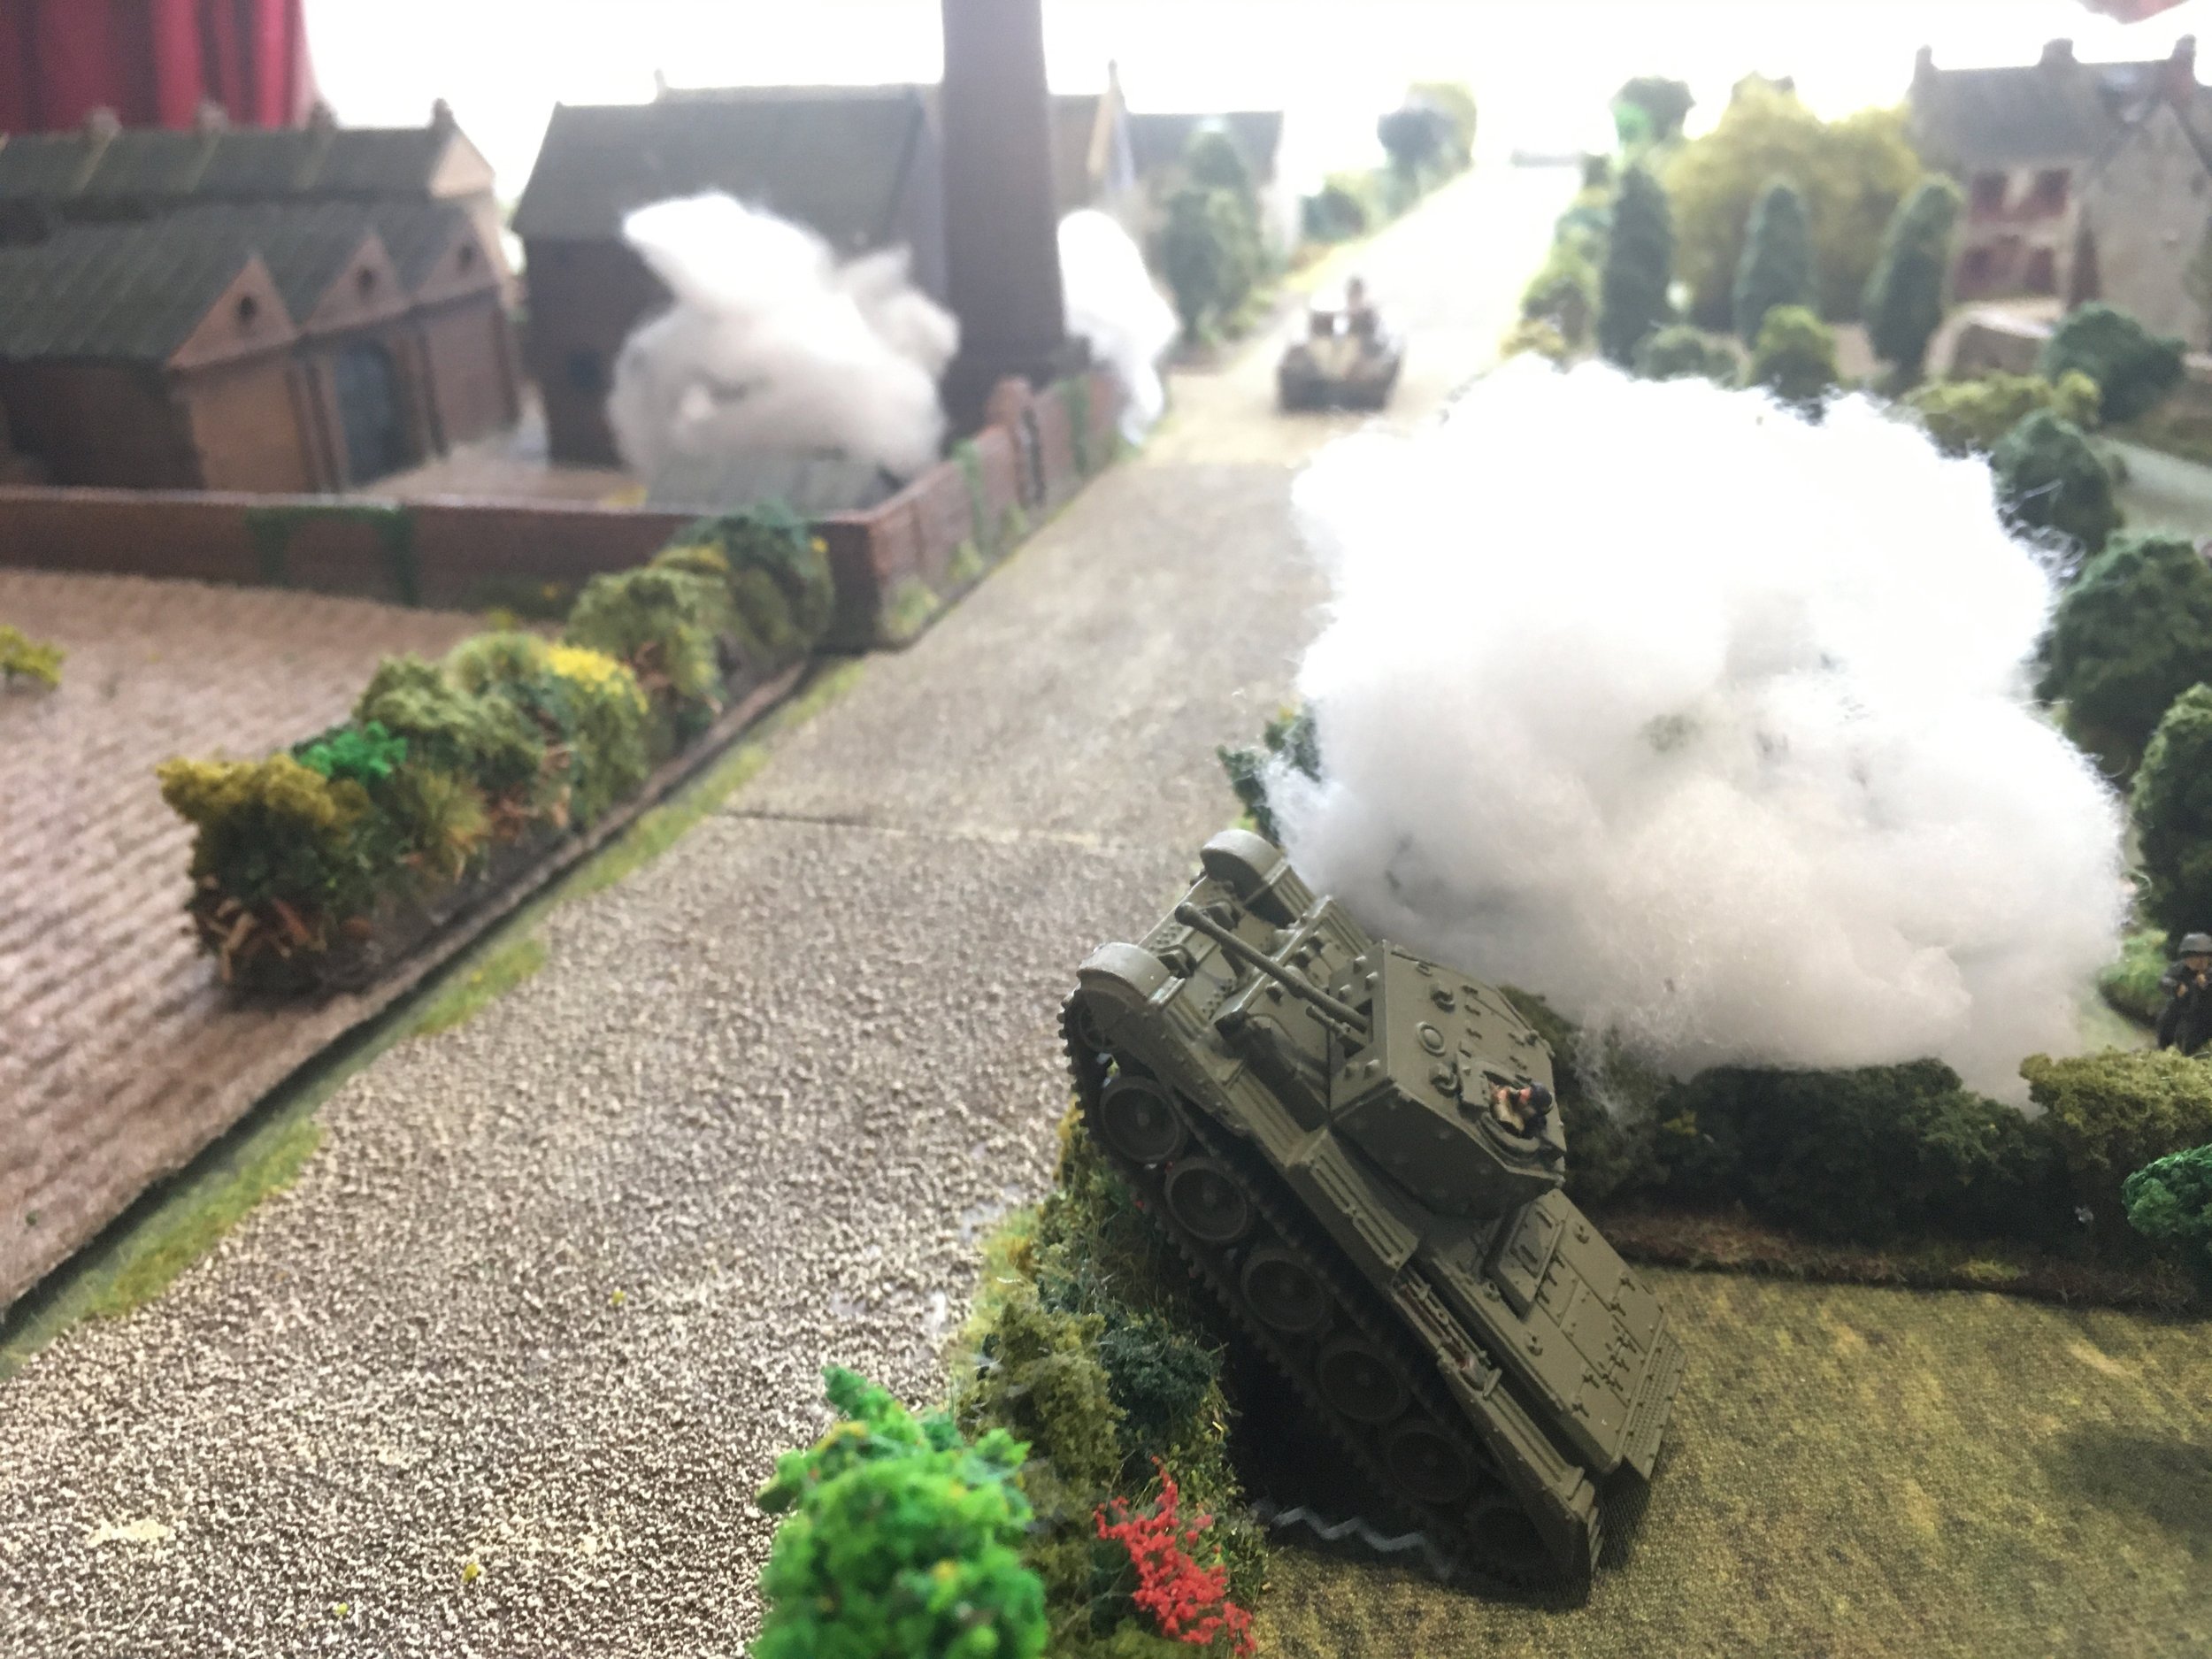 The Panther (somehow) spotted the beached Cromwell...